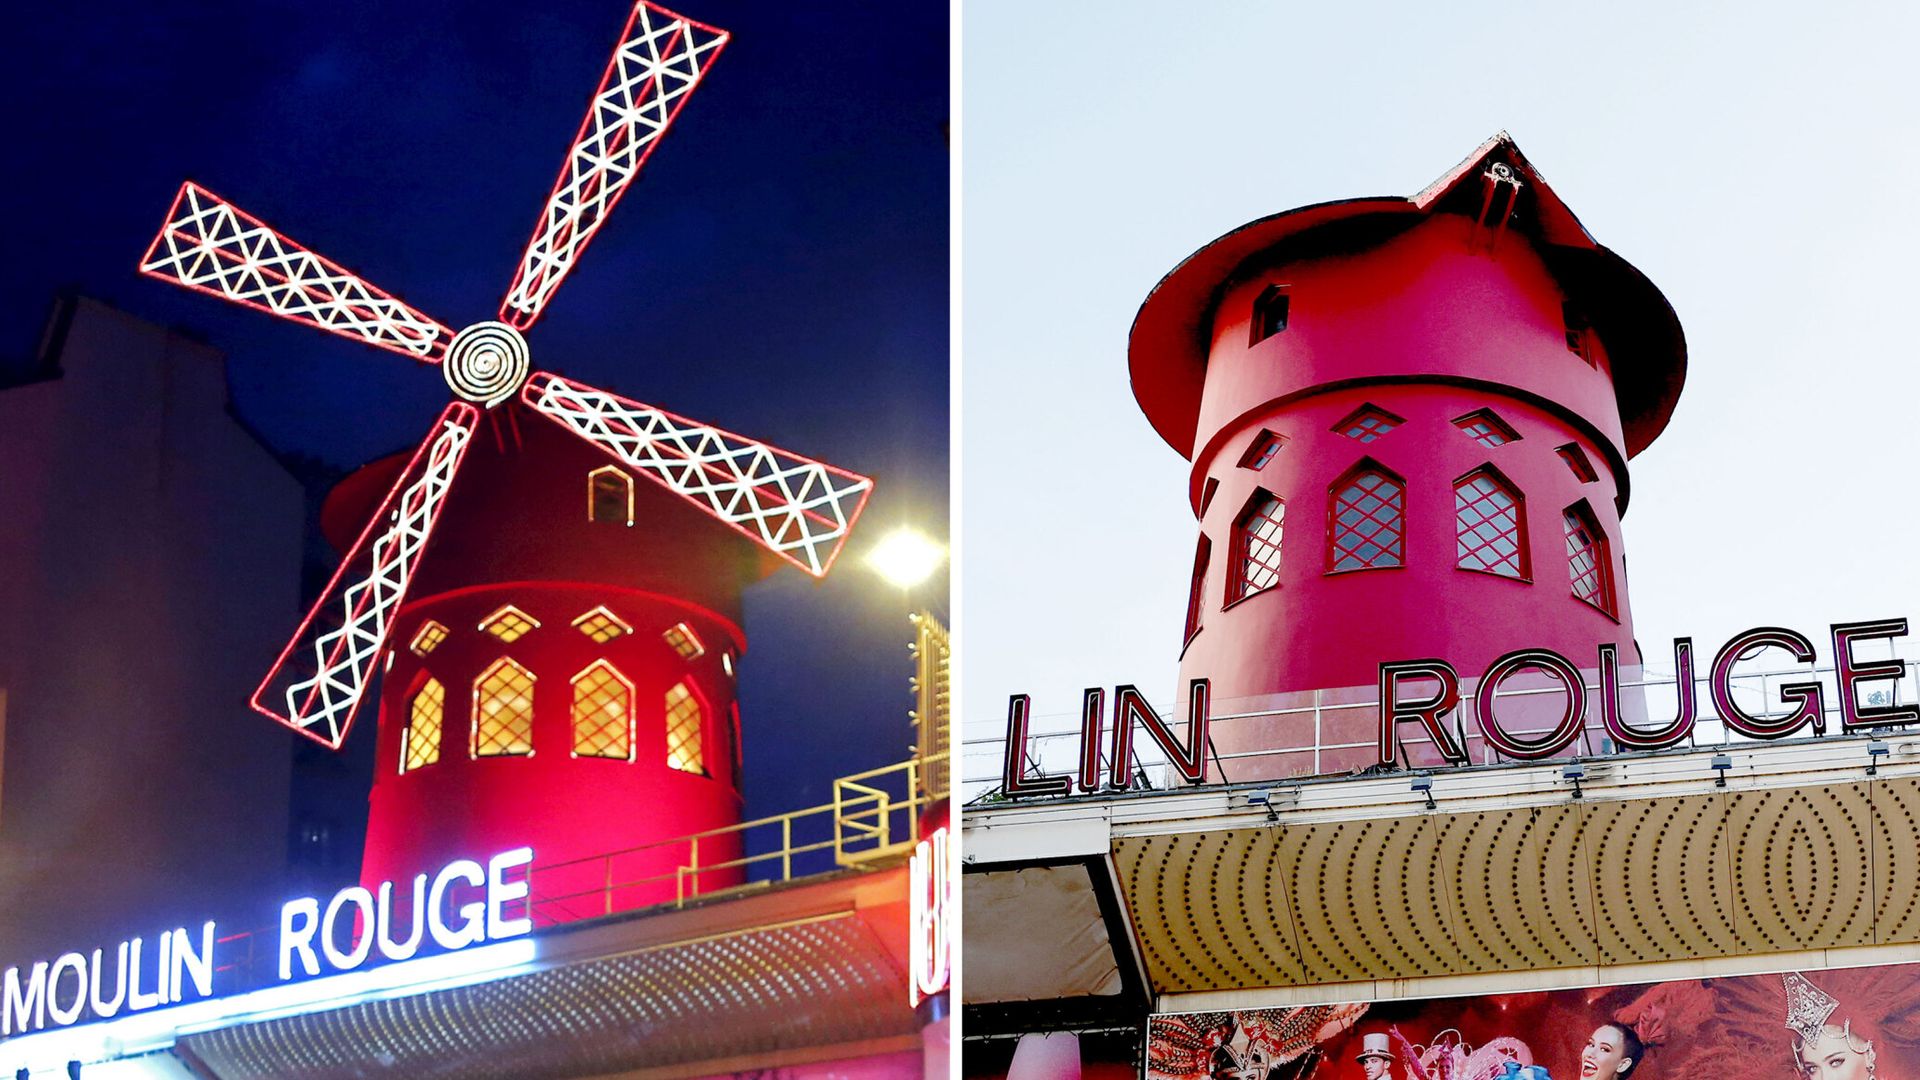 Moulin Rouge loses its Windmill blades